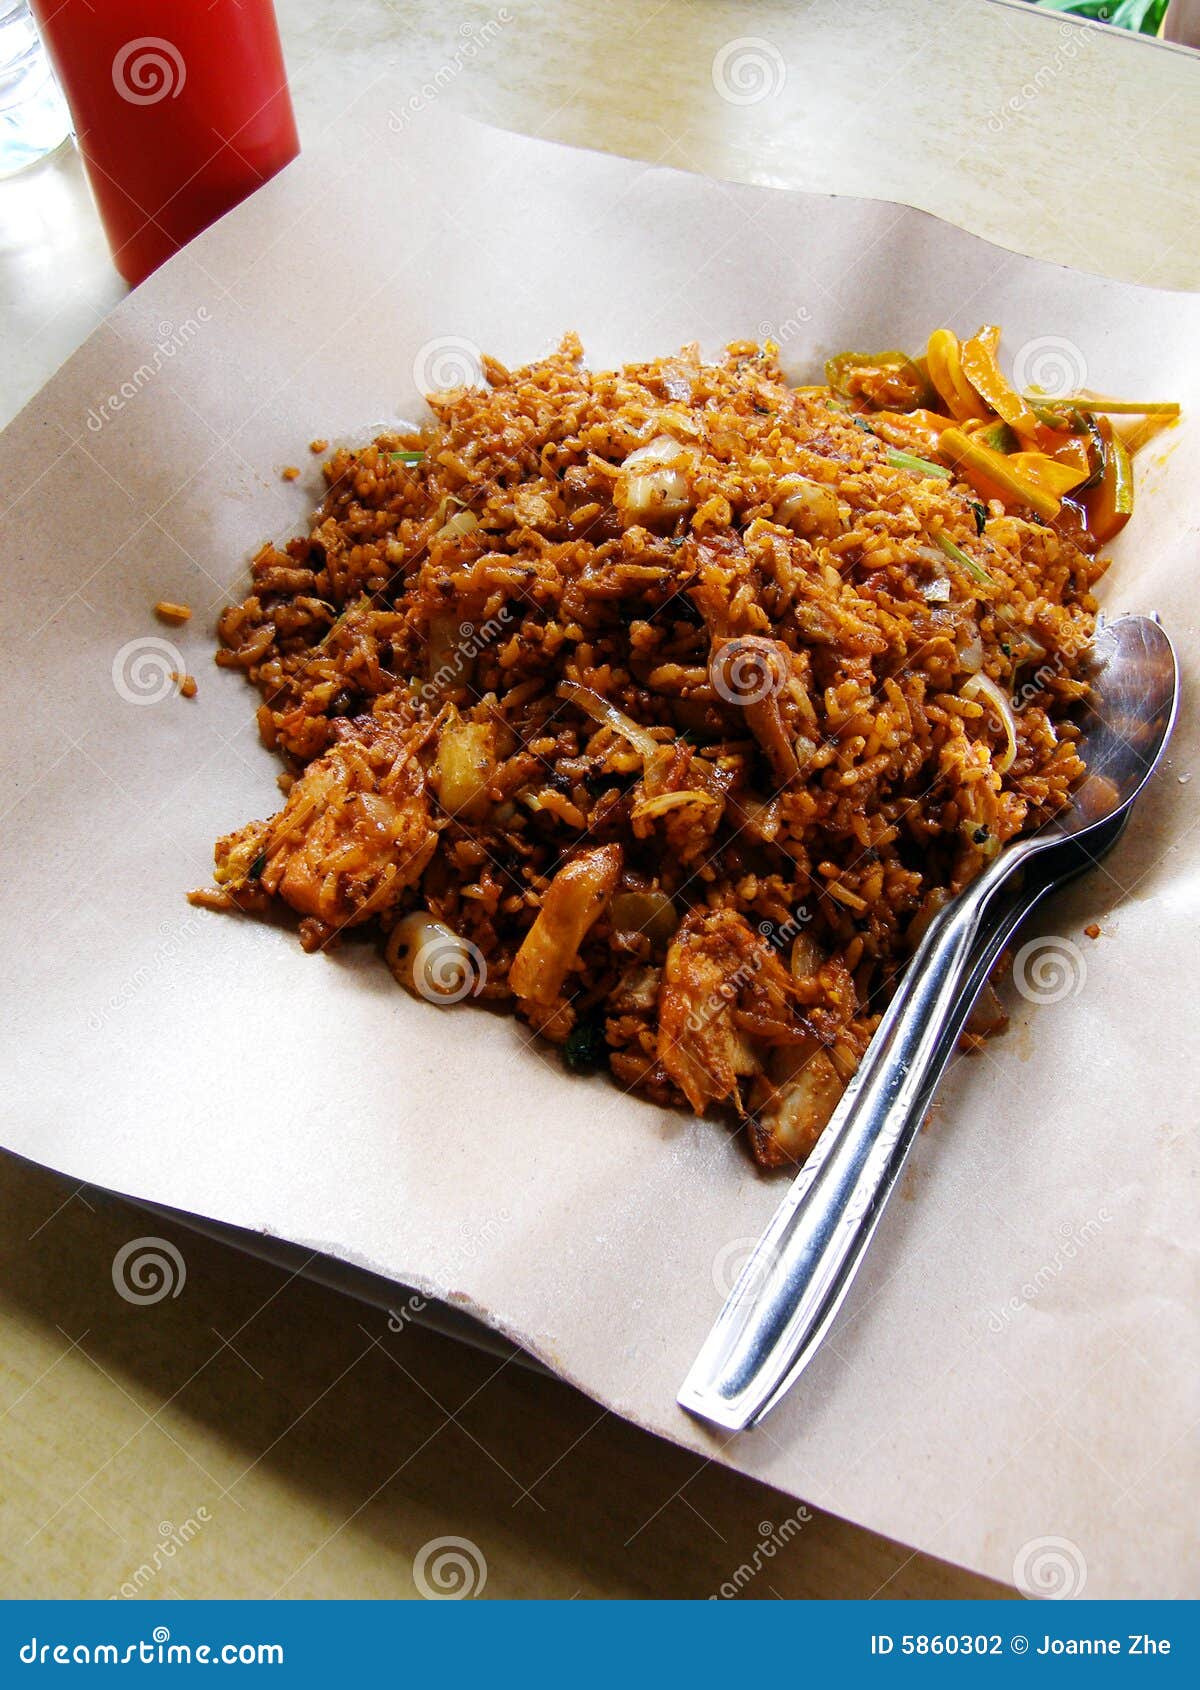 Typical lunch in Brazil - fries, rice, pasta, beef and salad Stock Photo -  Alamy